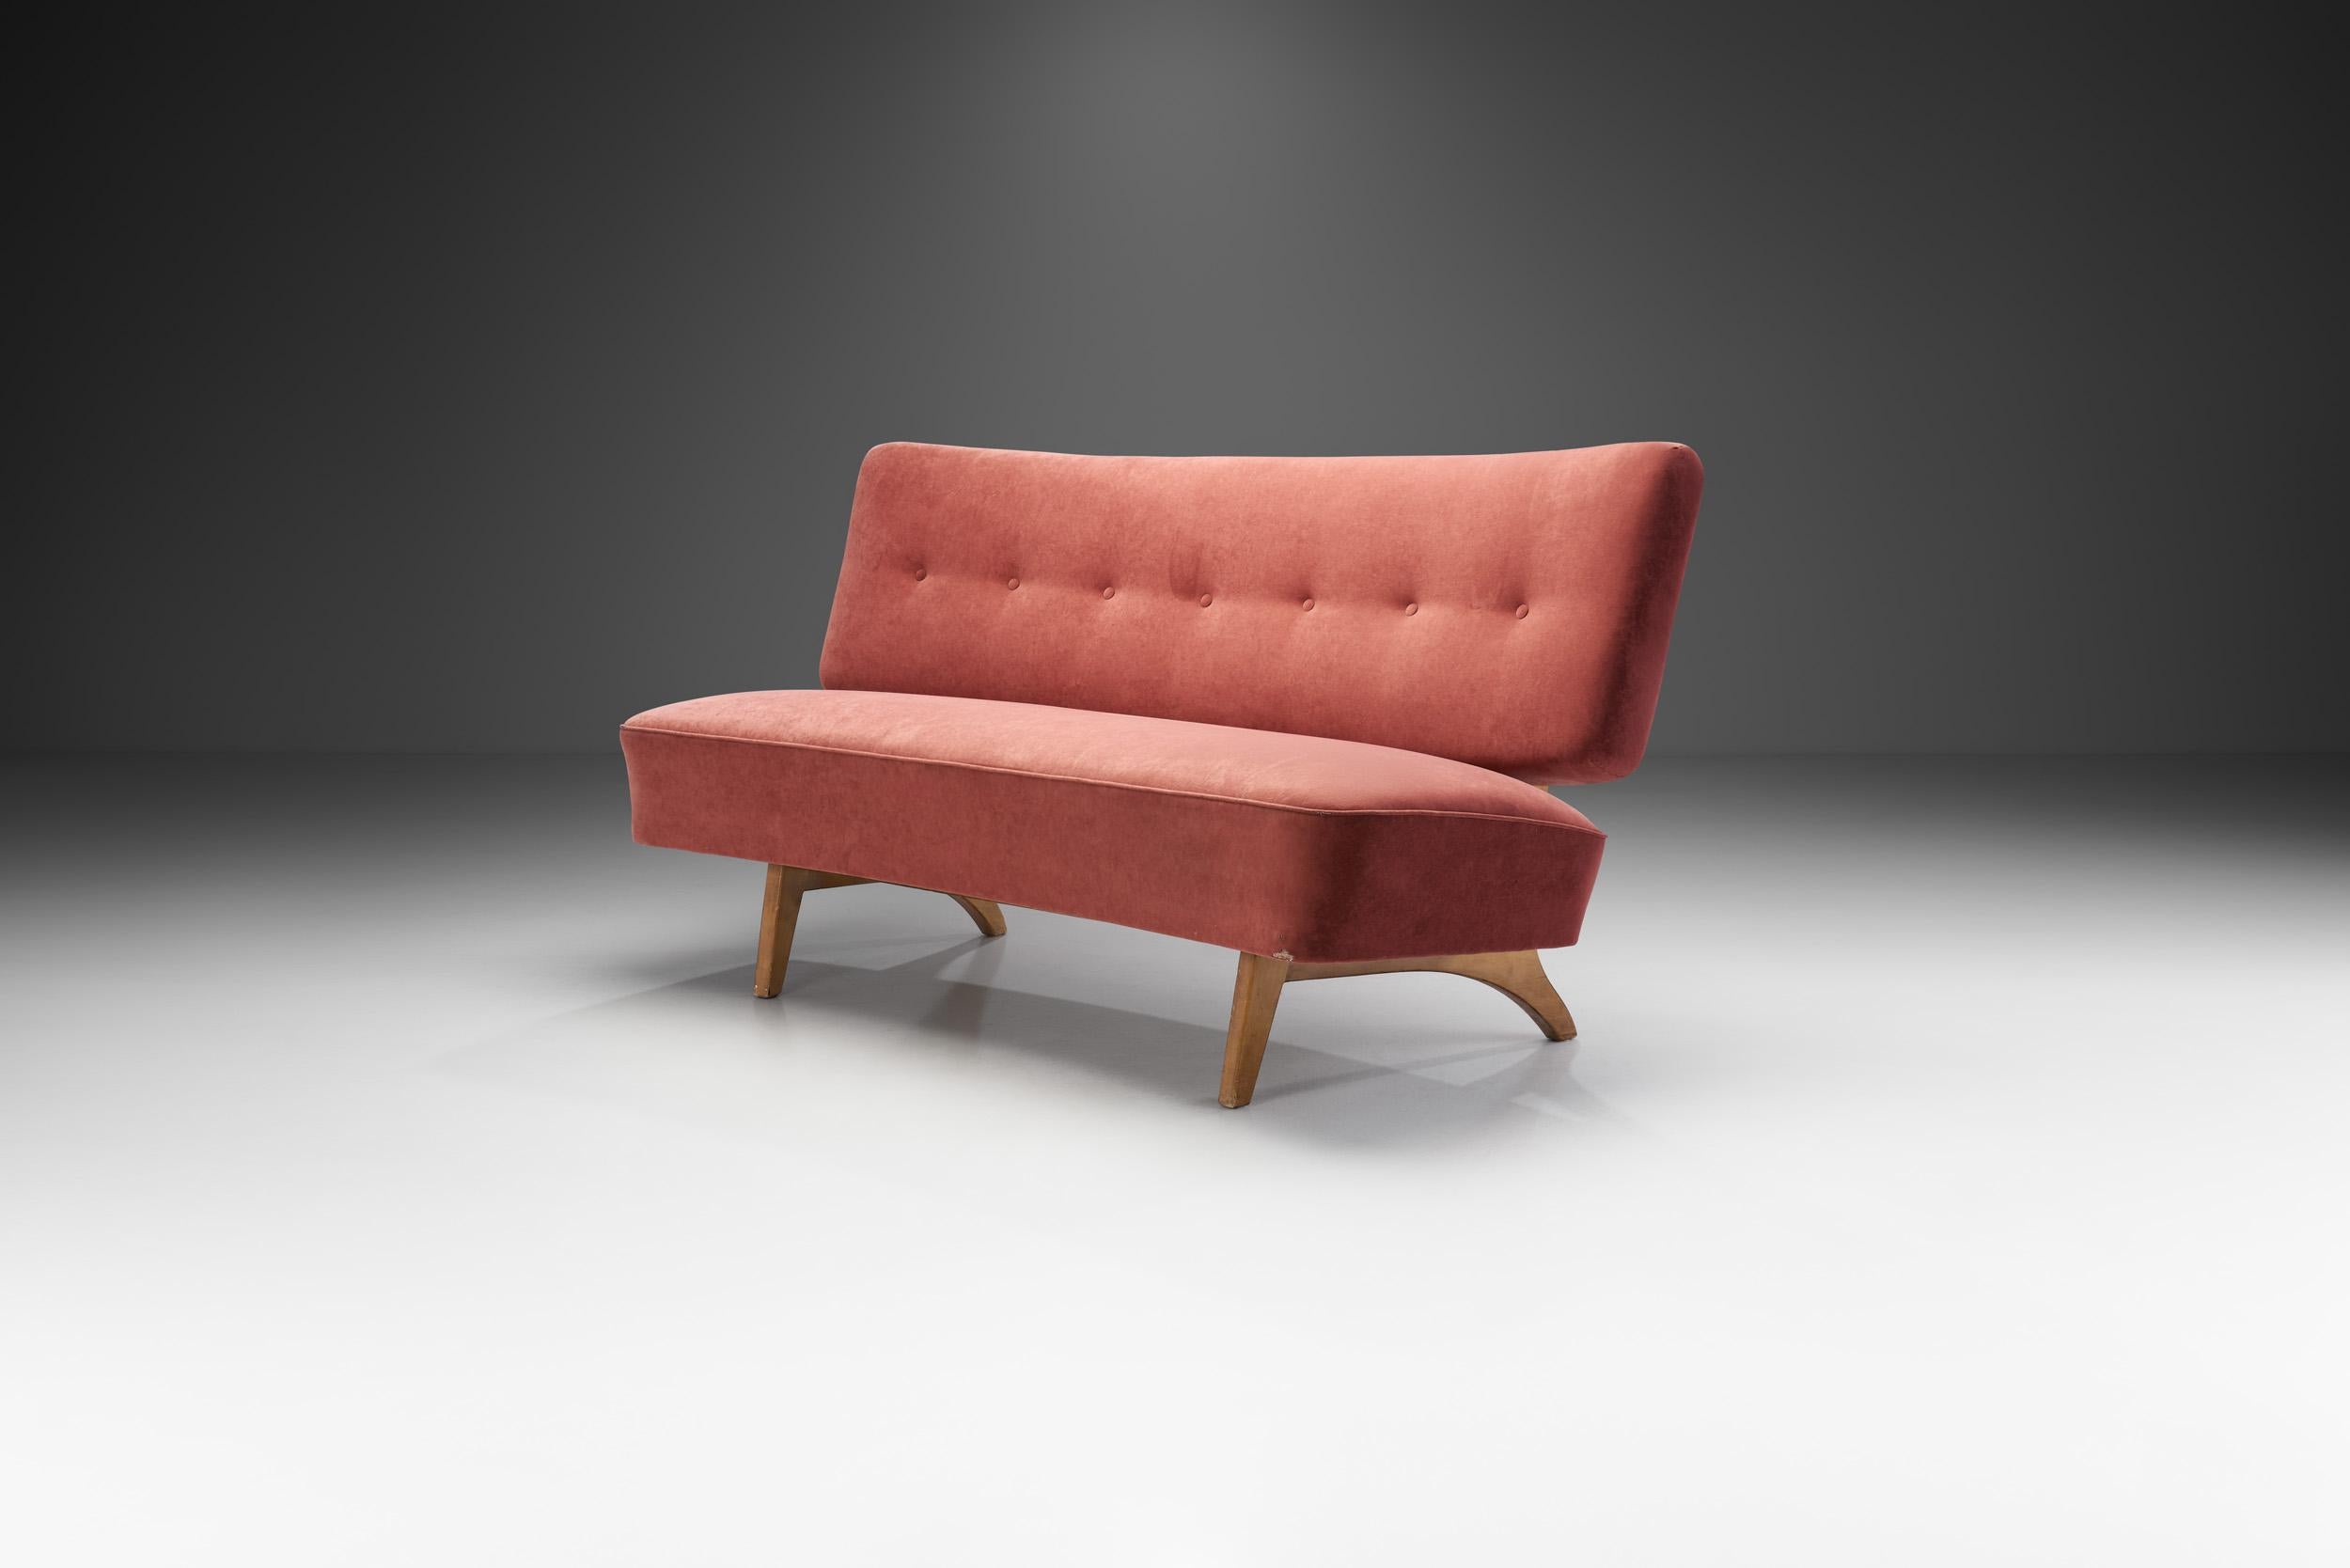 This wonderful commemoration of Finnish mid-century design is the Susanna sofa created by Lahti Lepokaulusto and designed in the 1950s by Aake Anttila. Famous for its suspension and structure, this model quickly became beloved in Finland.

Due to a